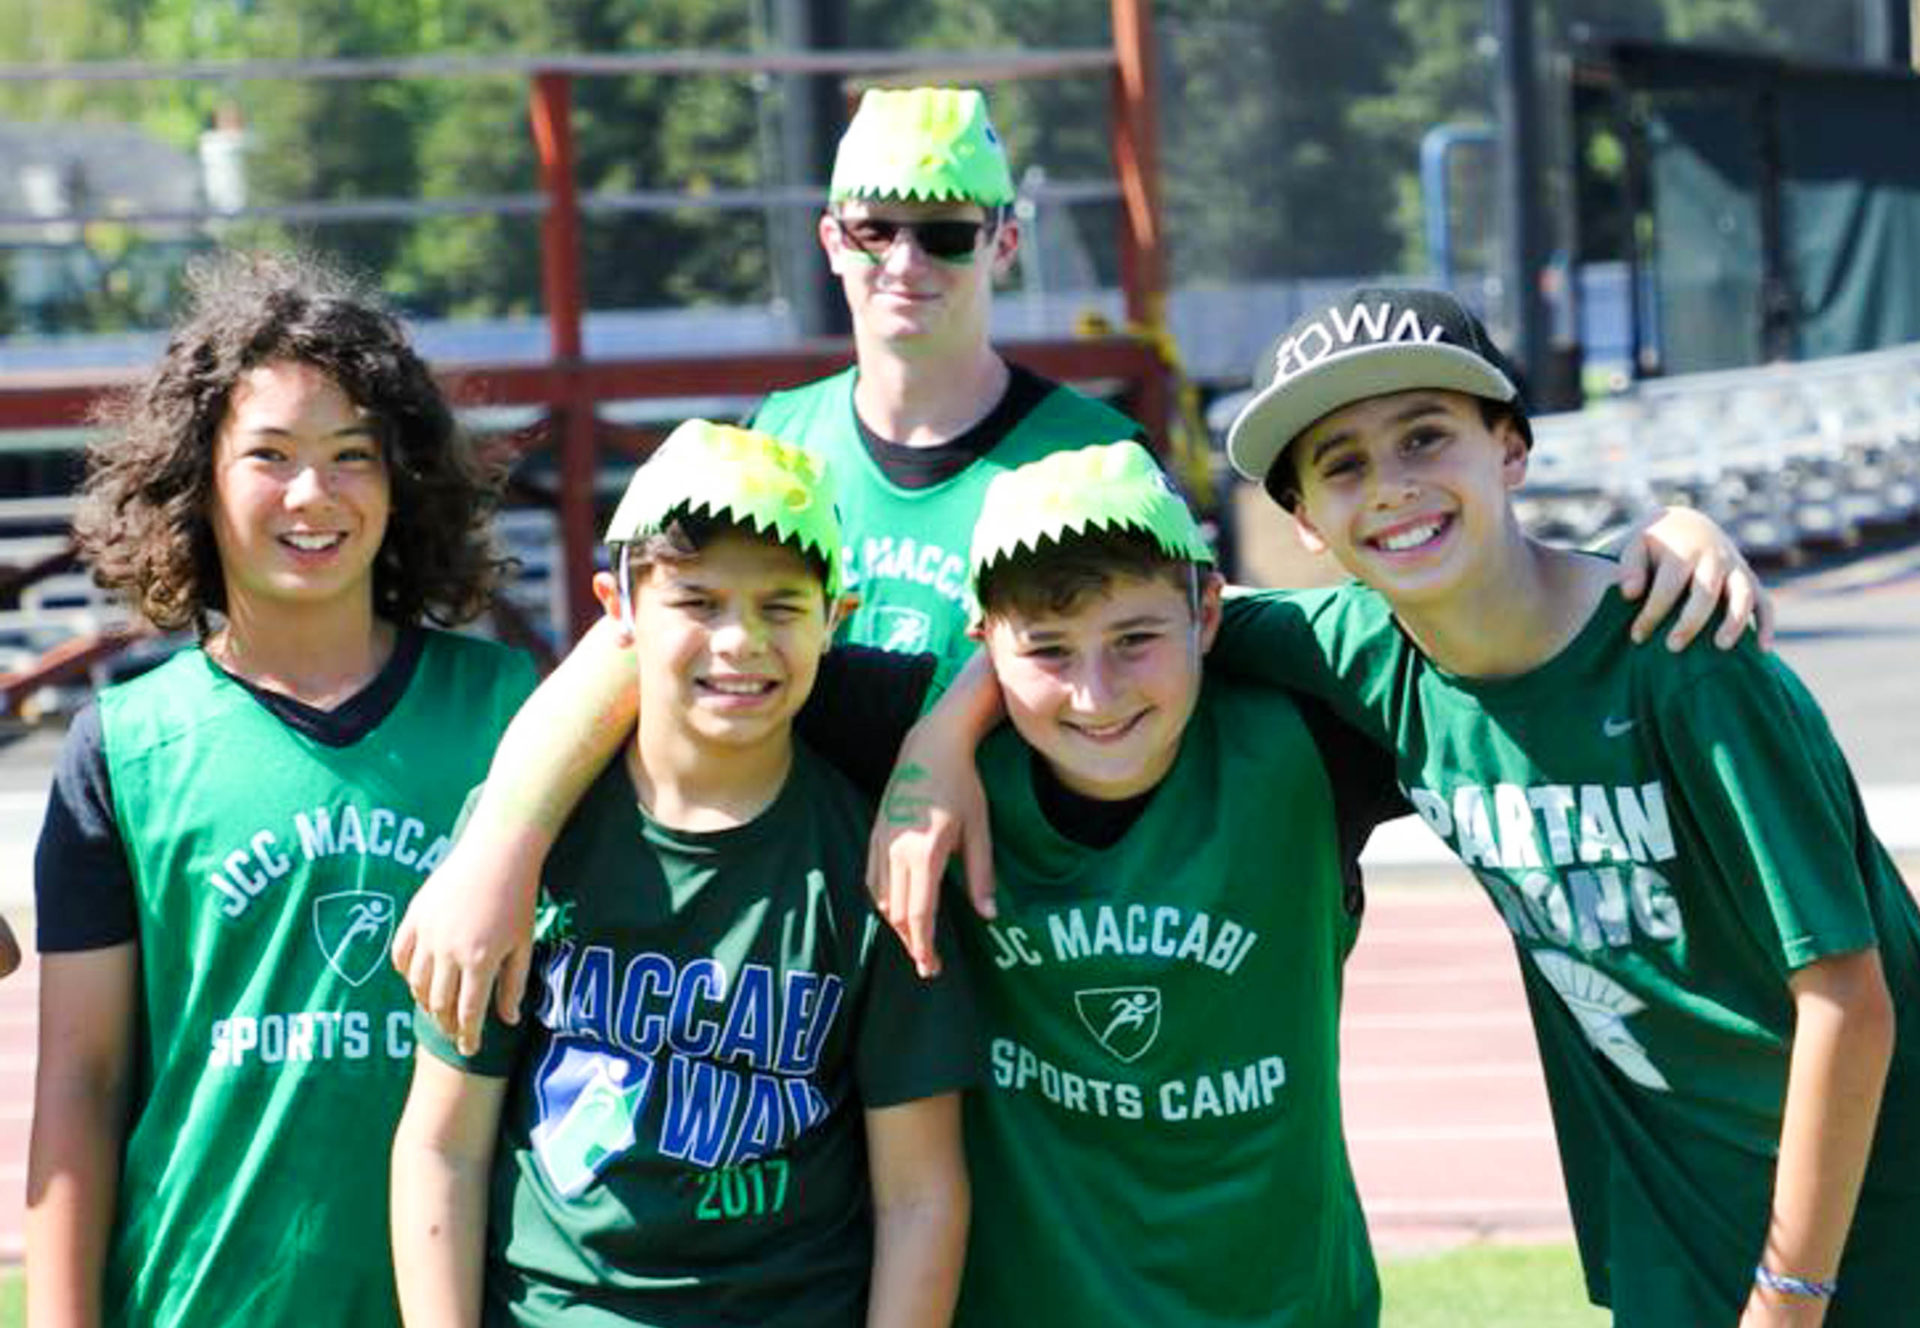 A few campers all in green camp shirts taking a photo together with arms around each other.